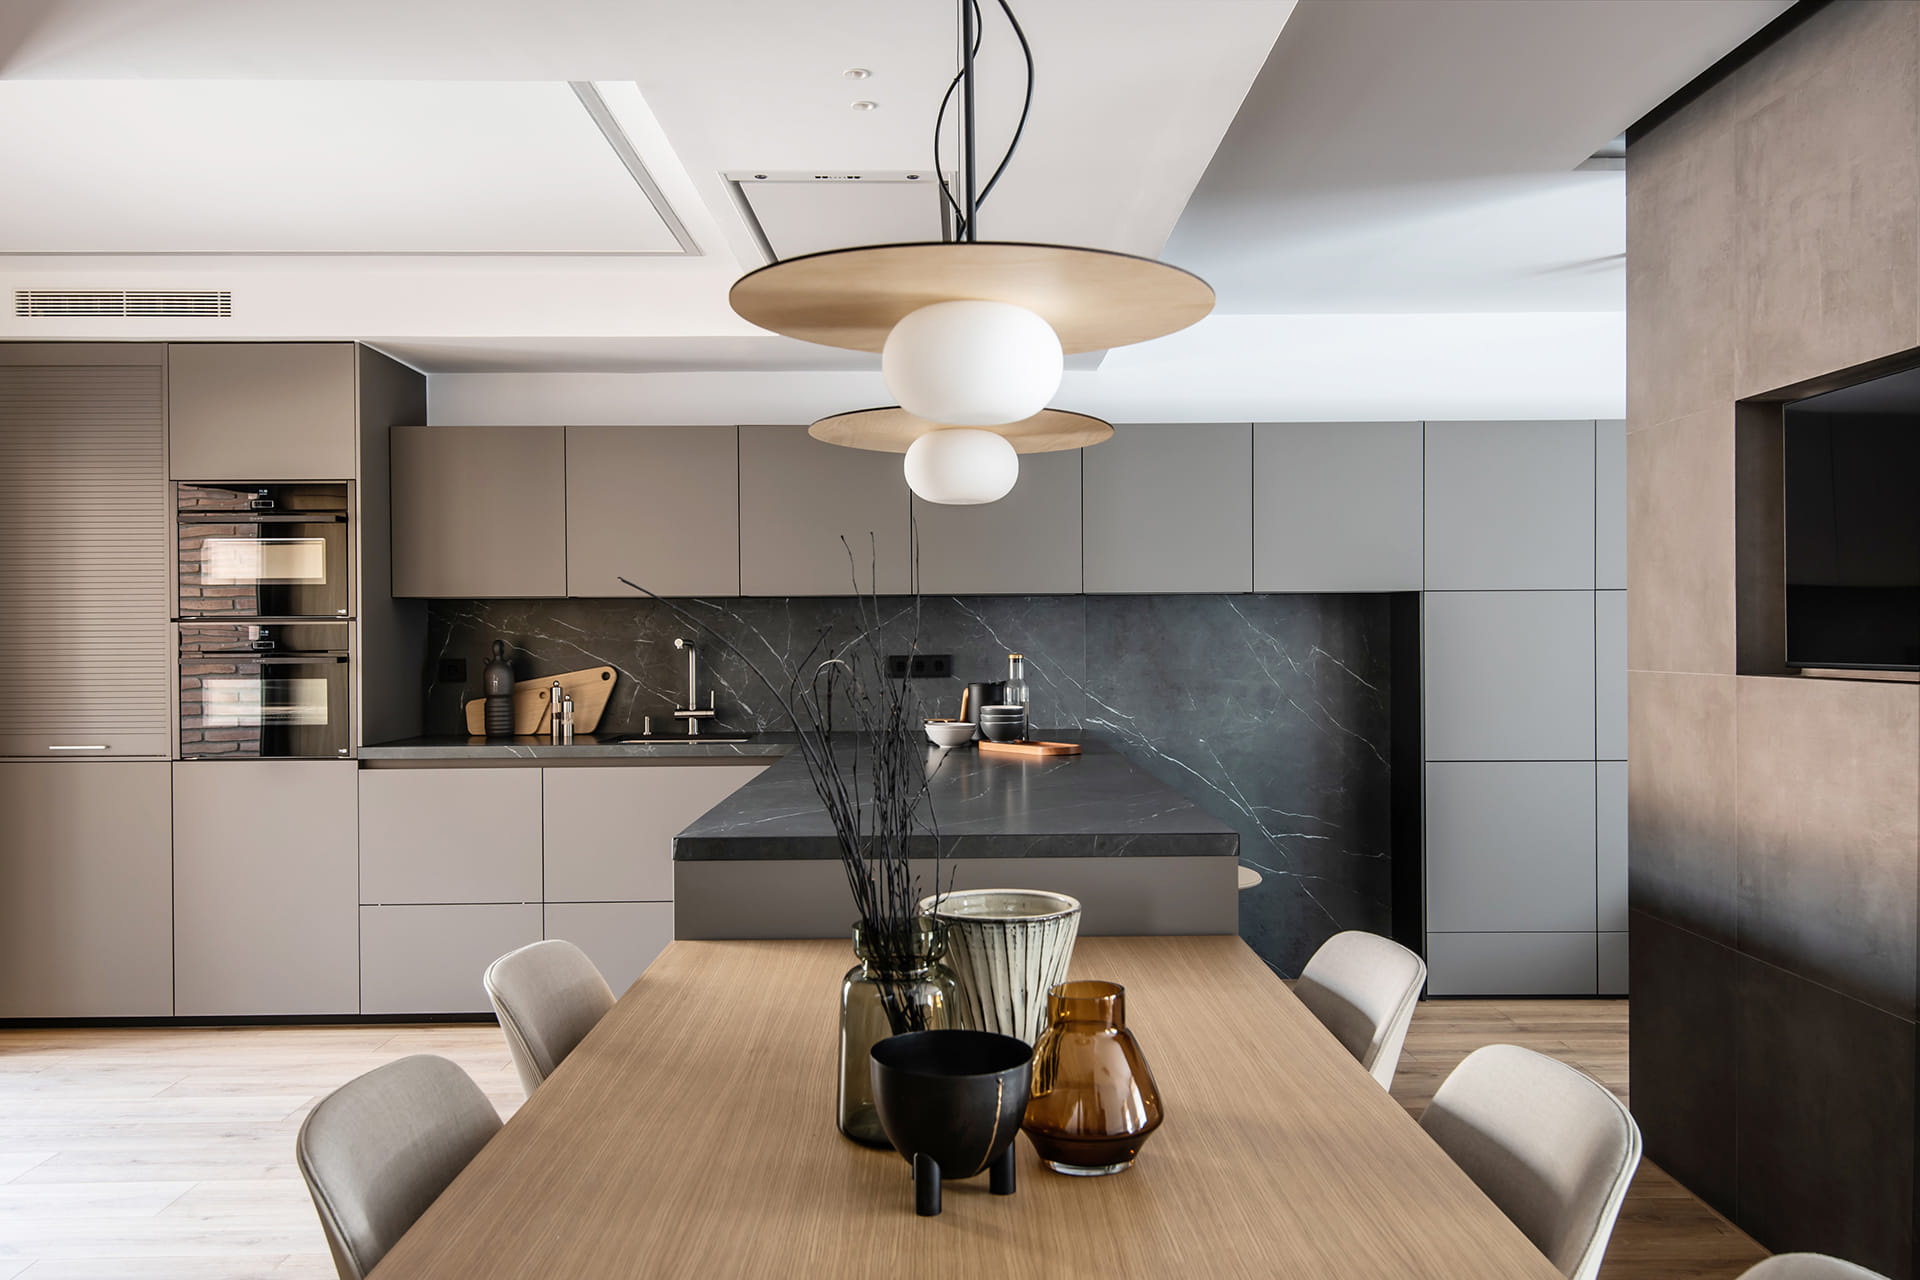 Grey Santos kitchen with peninsula and dining table